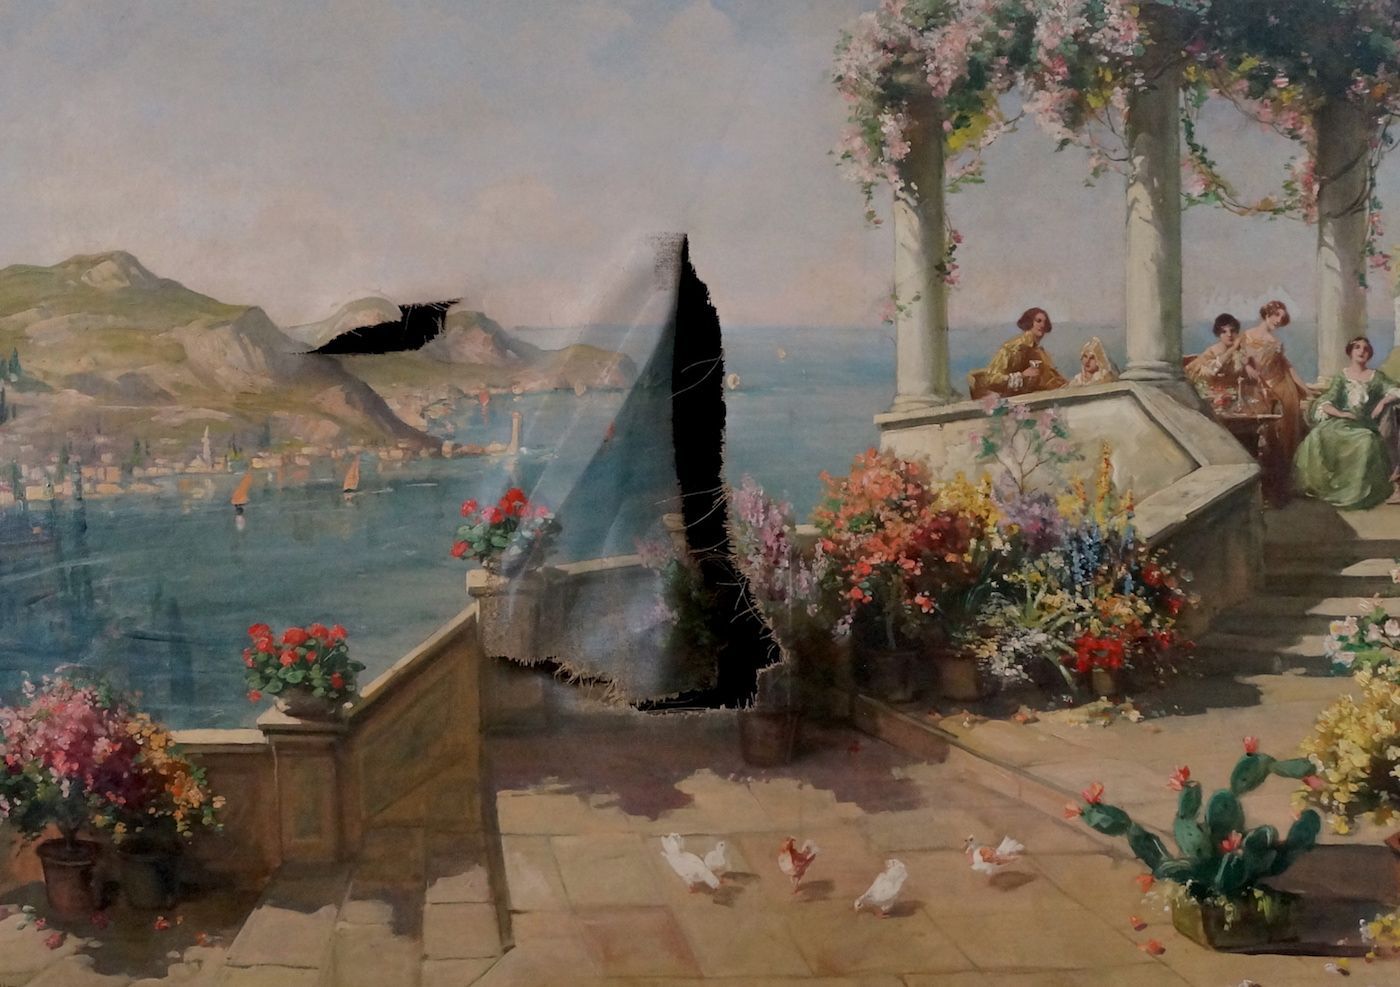 A Mediterranean landscape painting with one large L-shaped tear in the center and a smaller, horizontal tear to the left